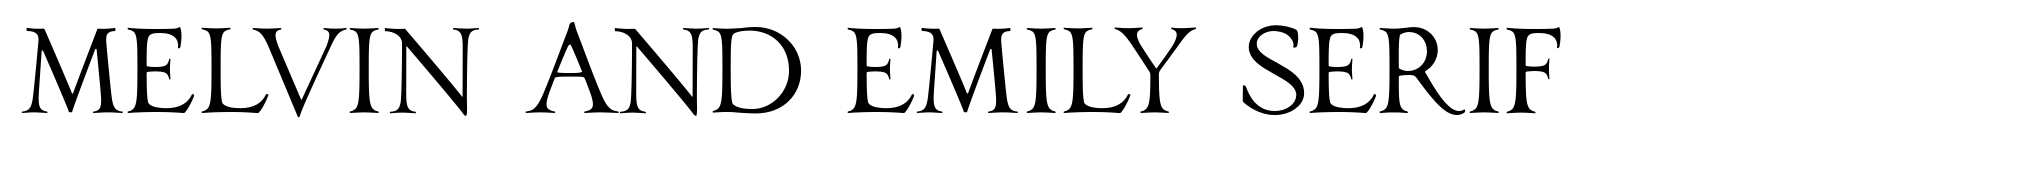 Melvin and Emily Serif image